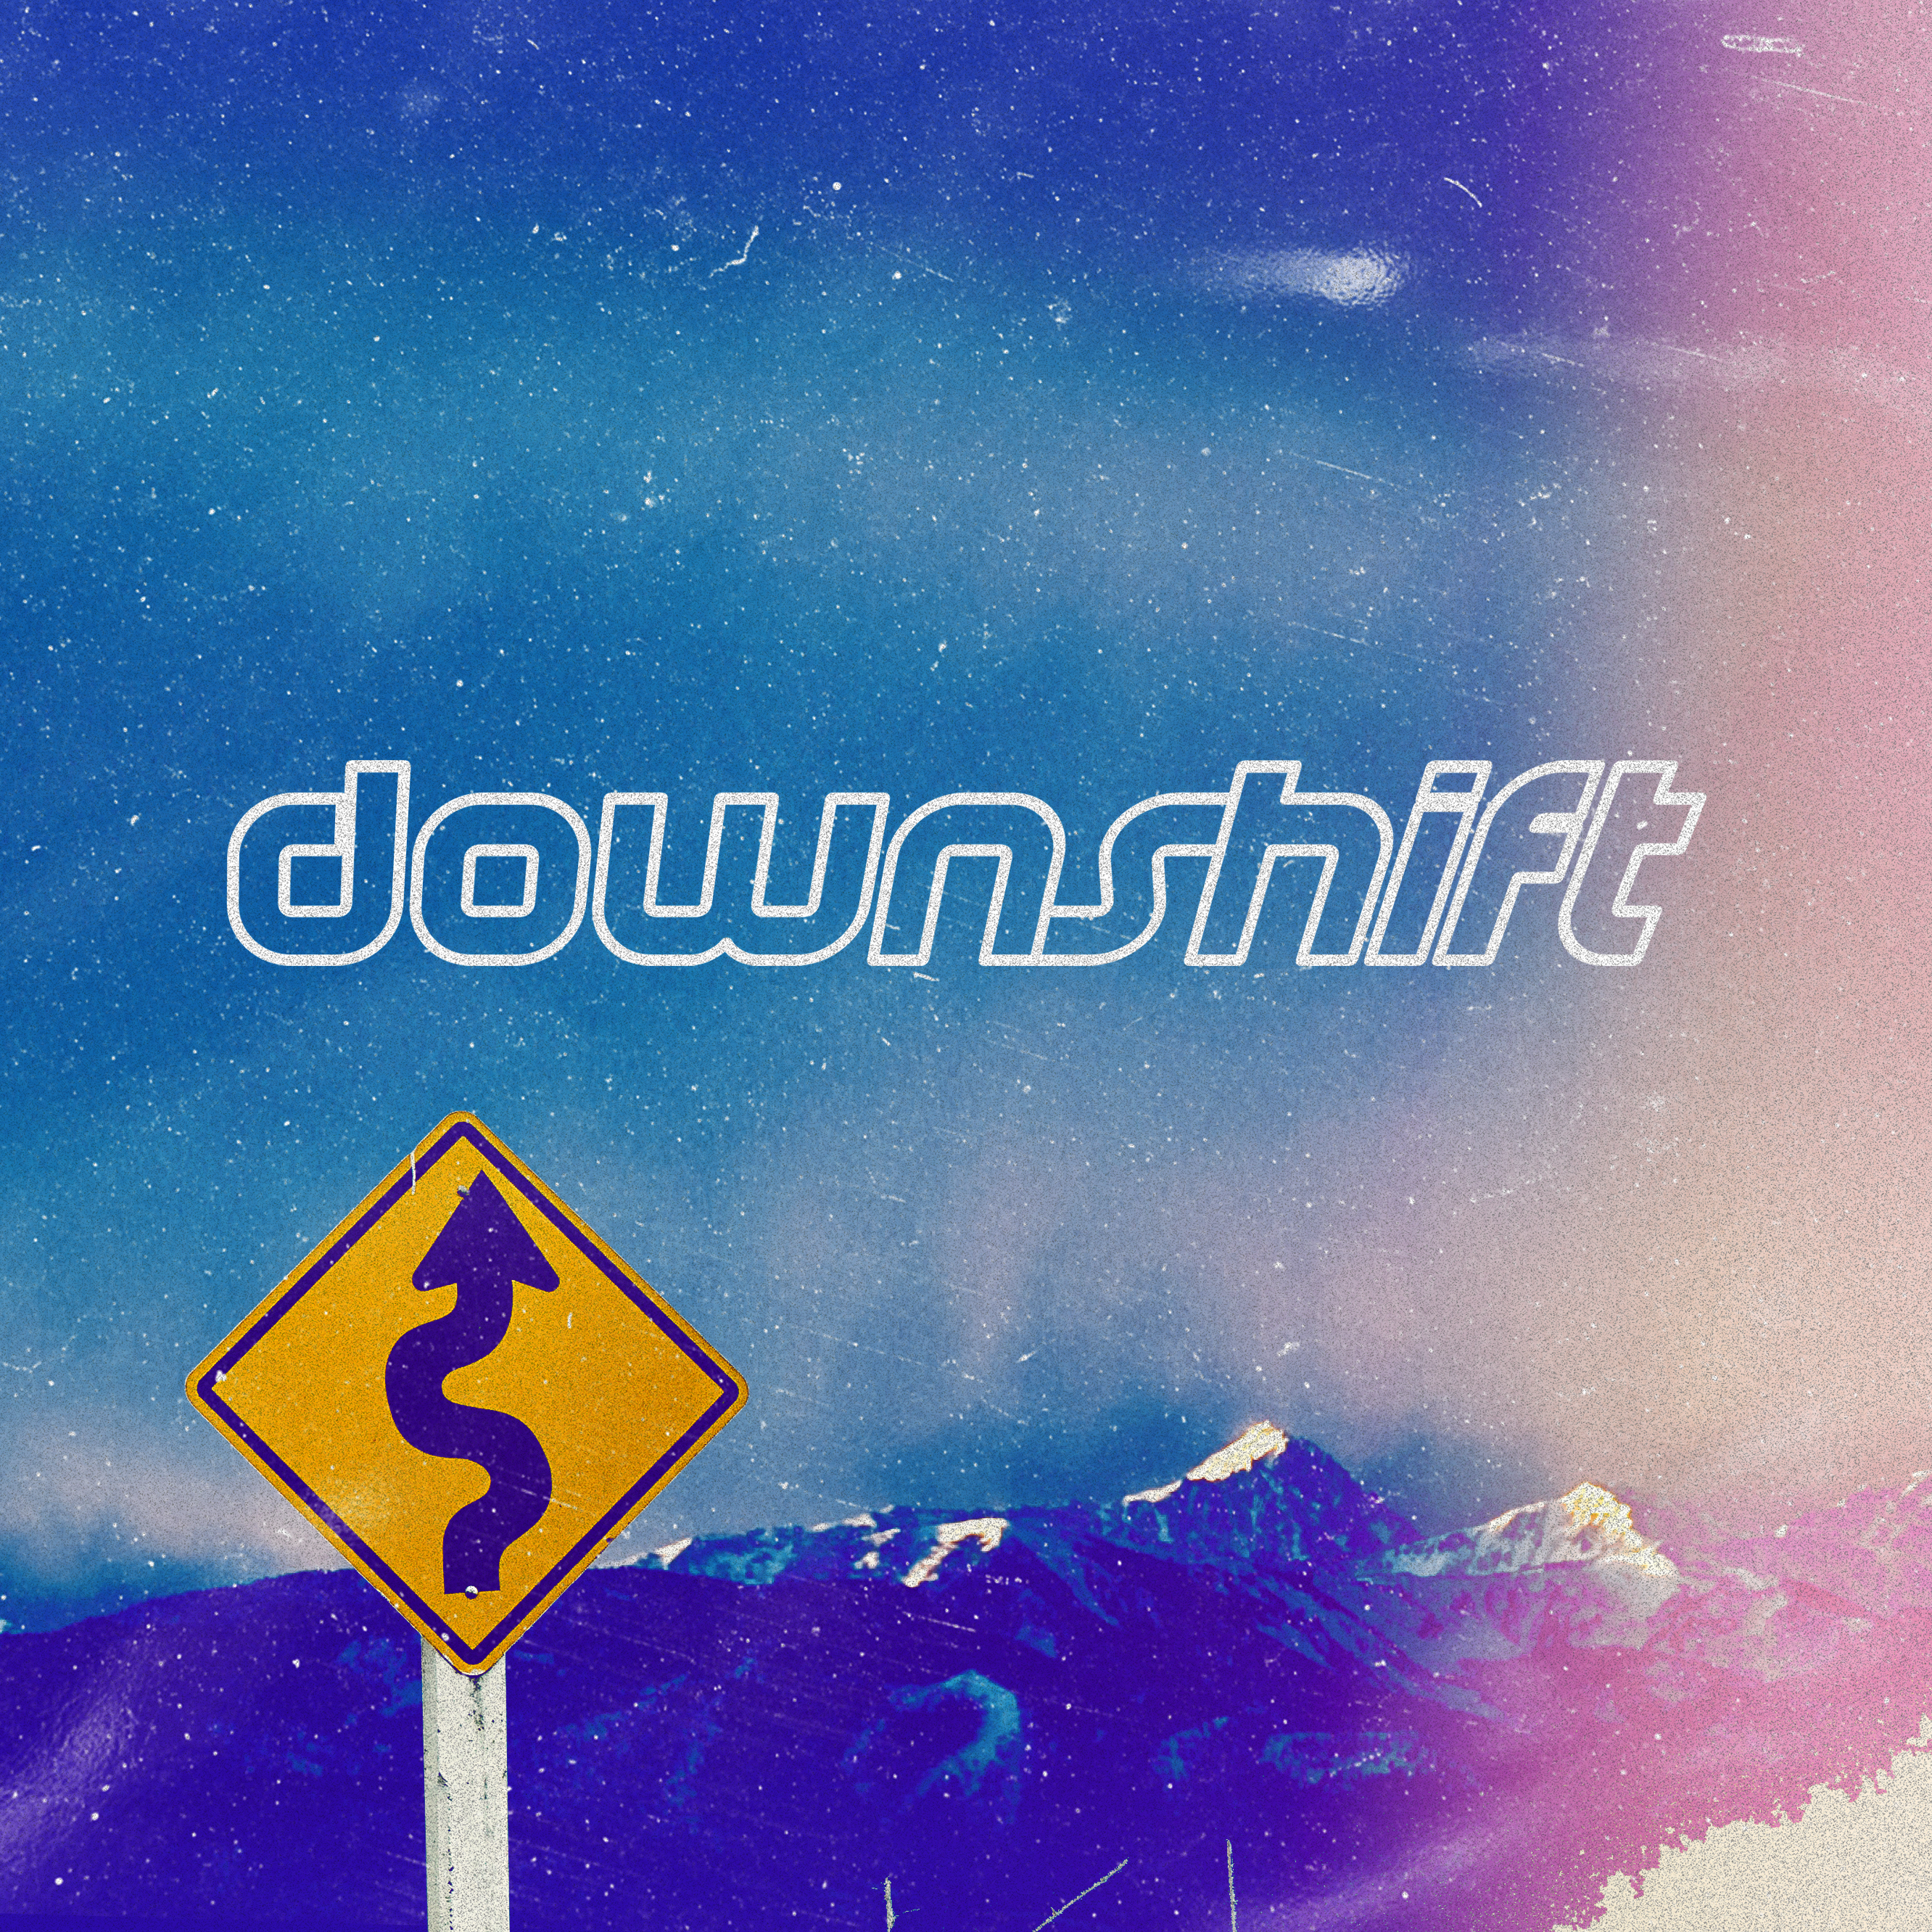 downshift #3: Eliminate Hurry... SIMPLICITY